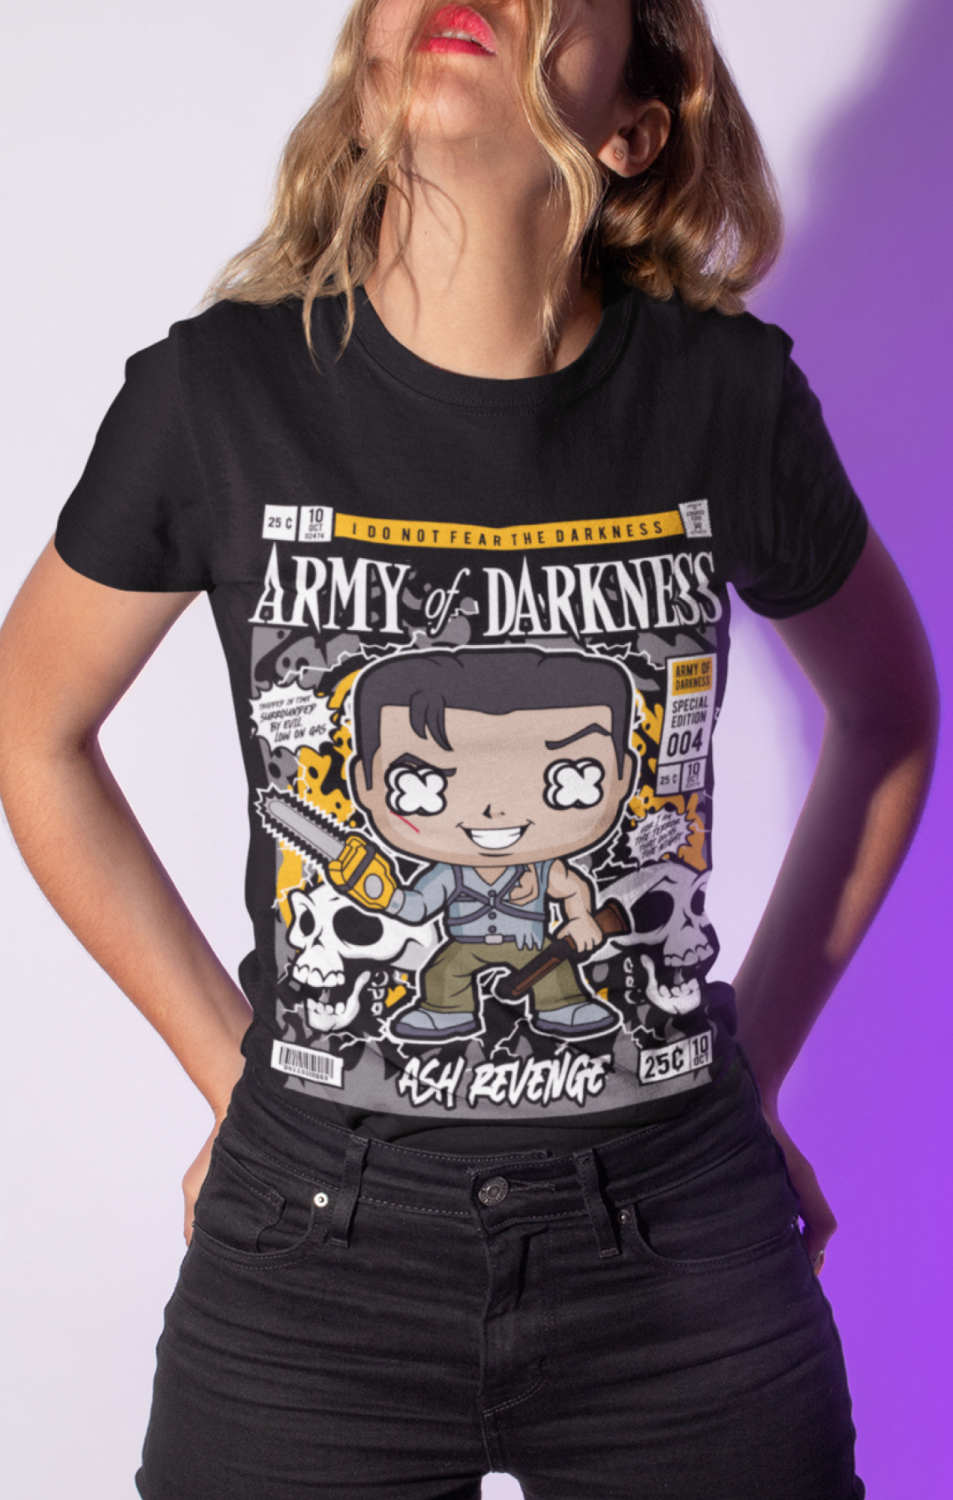 ARMY OF DARKNESS - CHOOSE THE STYLE